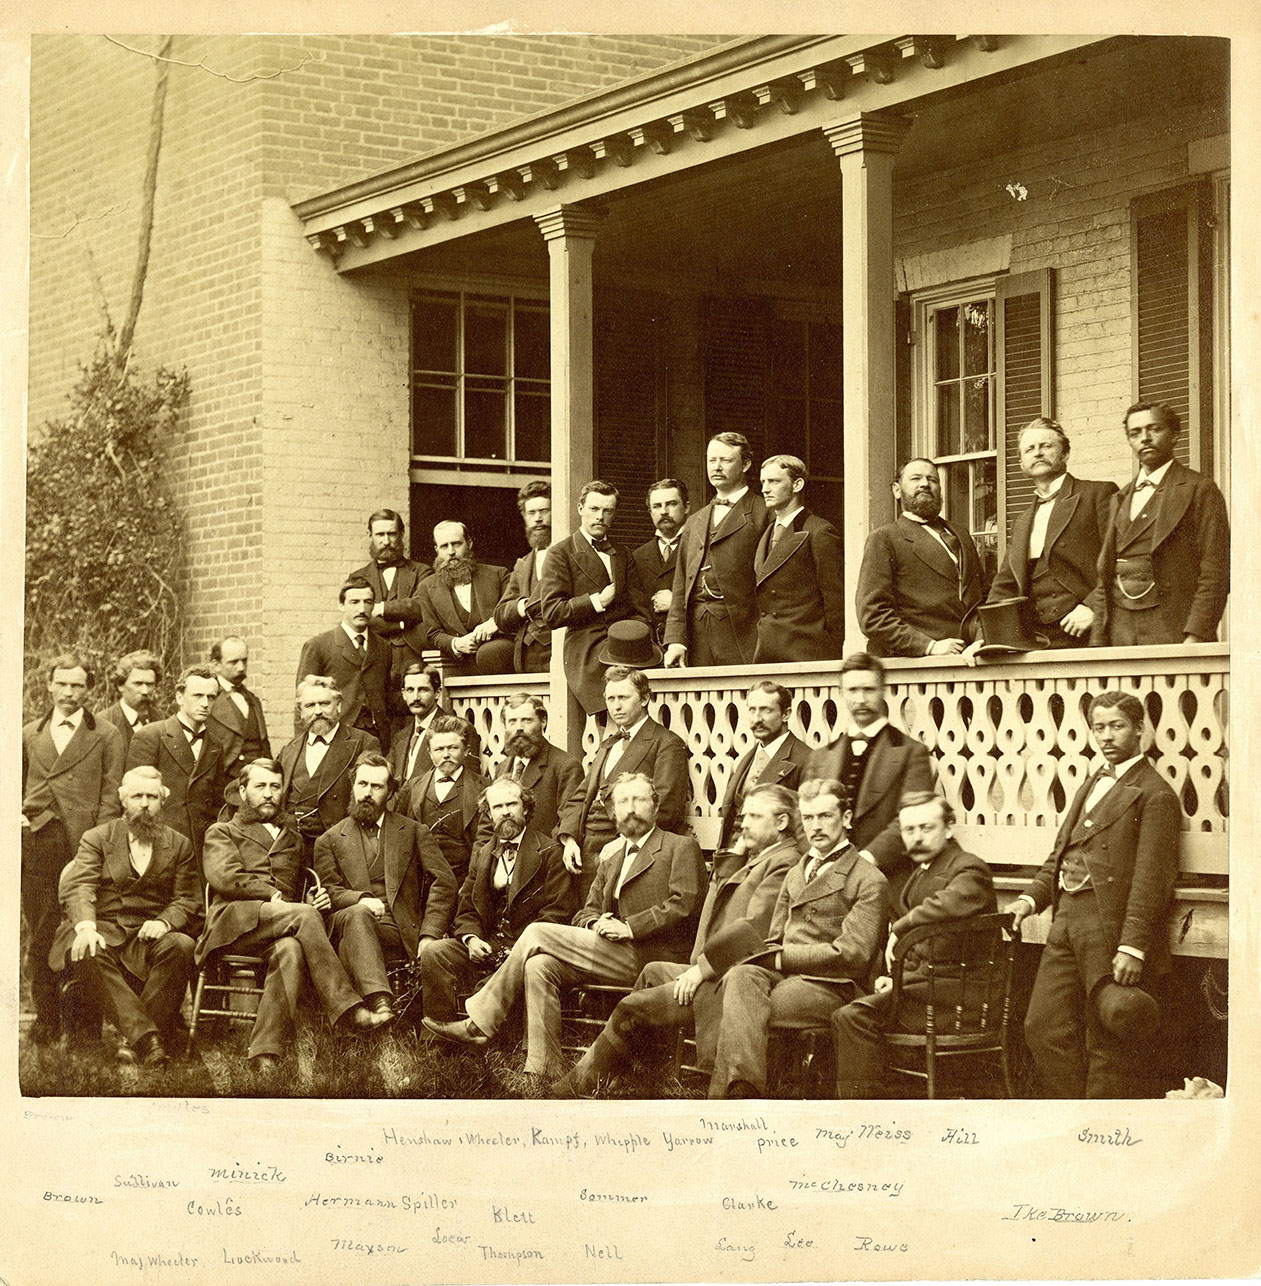 Photo of a group of men in suits, some on a porch and others in front of the porch